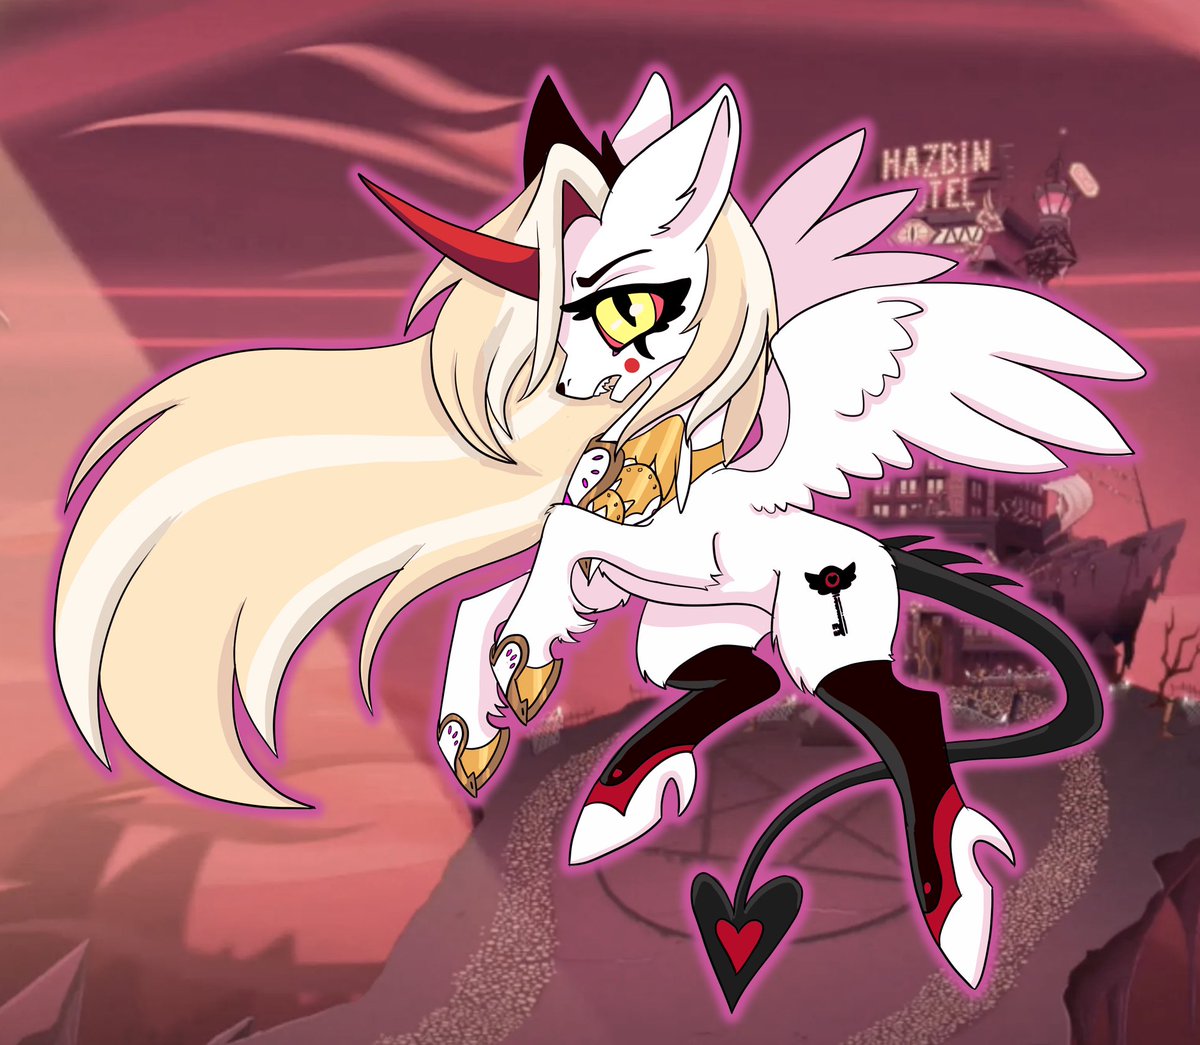 Charlie the Alicorn anybody? My two obsession collide with this #MLPFIM meets #HazbinHotel creation! Enjoy!